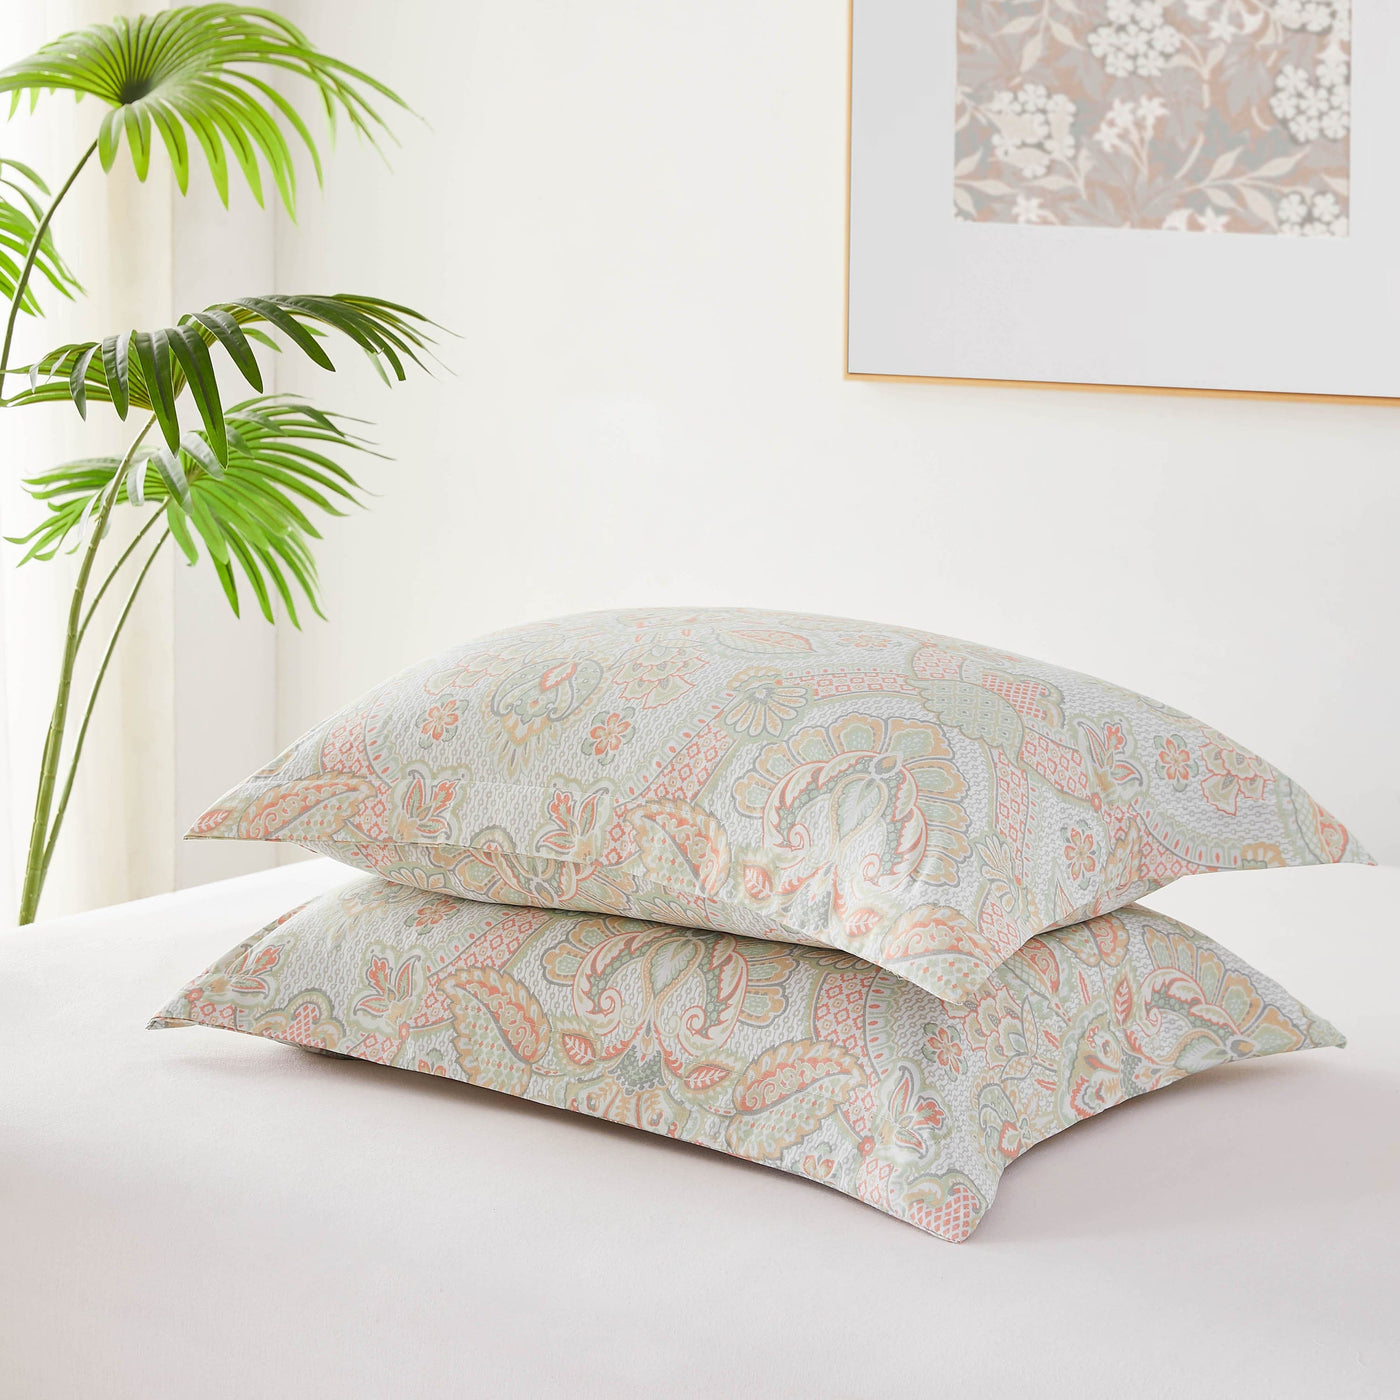 Detailed Shams Image of Enchantment Duvet Cover in coral#color_enchantment-coral